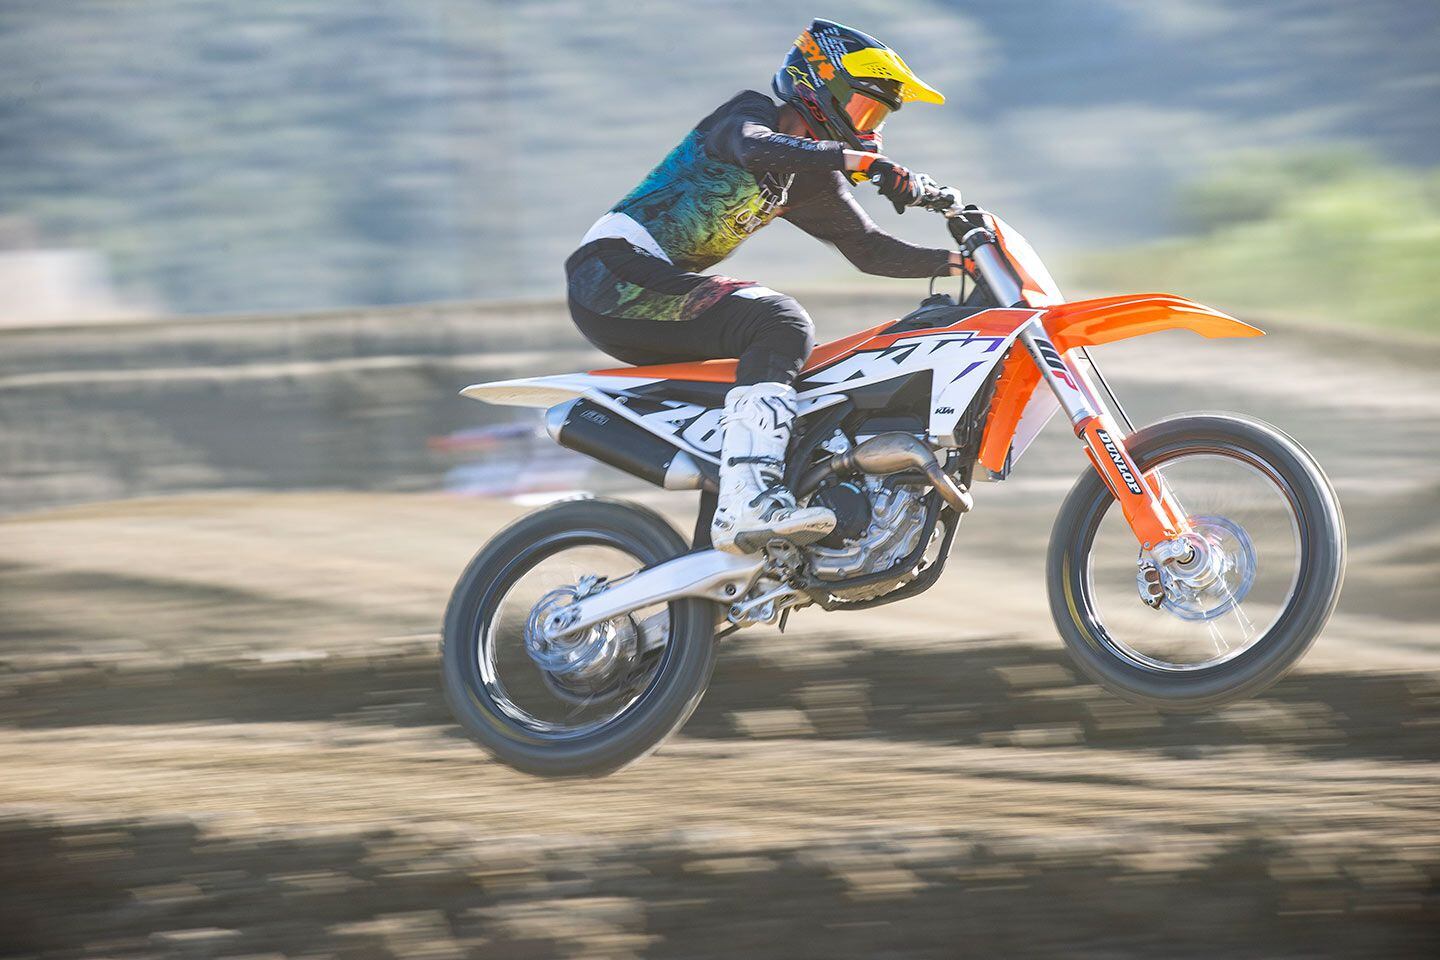 “KTM’s stiffer suspension setup than the other Austrian machines works better for me. It’s the only bike I made zero clicker adjustments to all day at the renowned Glen Helen Raceway, and felt extremely comfortable on.”  <i>—Michael Wicker</i>